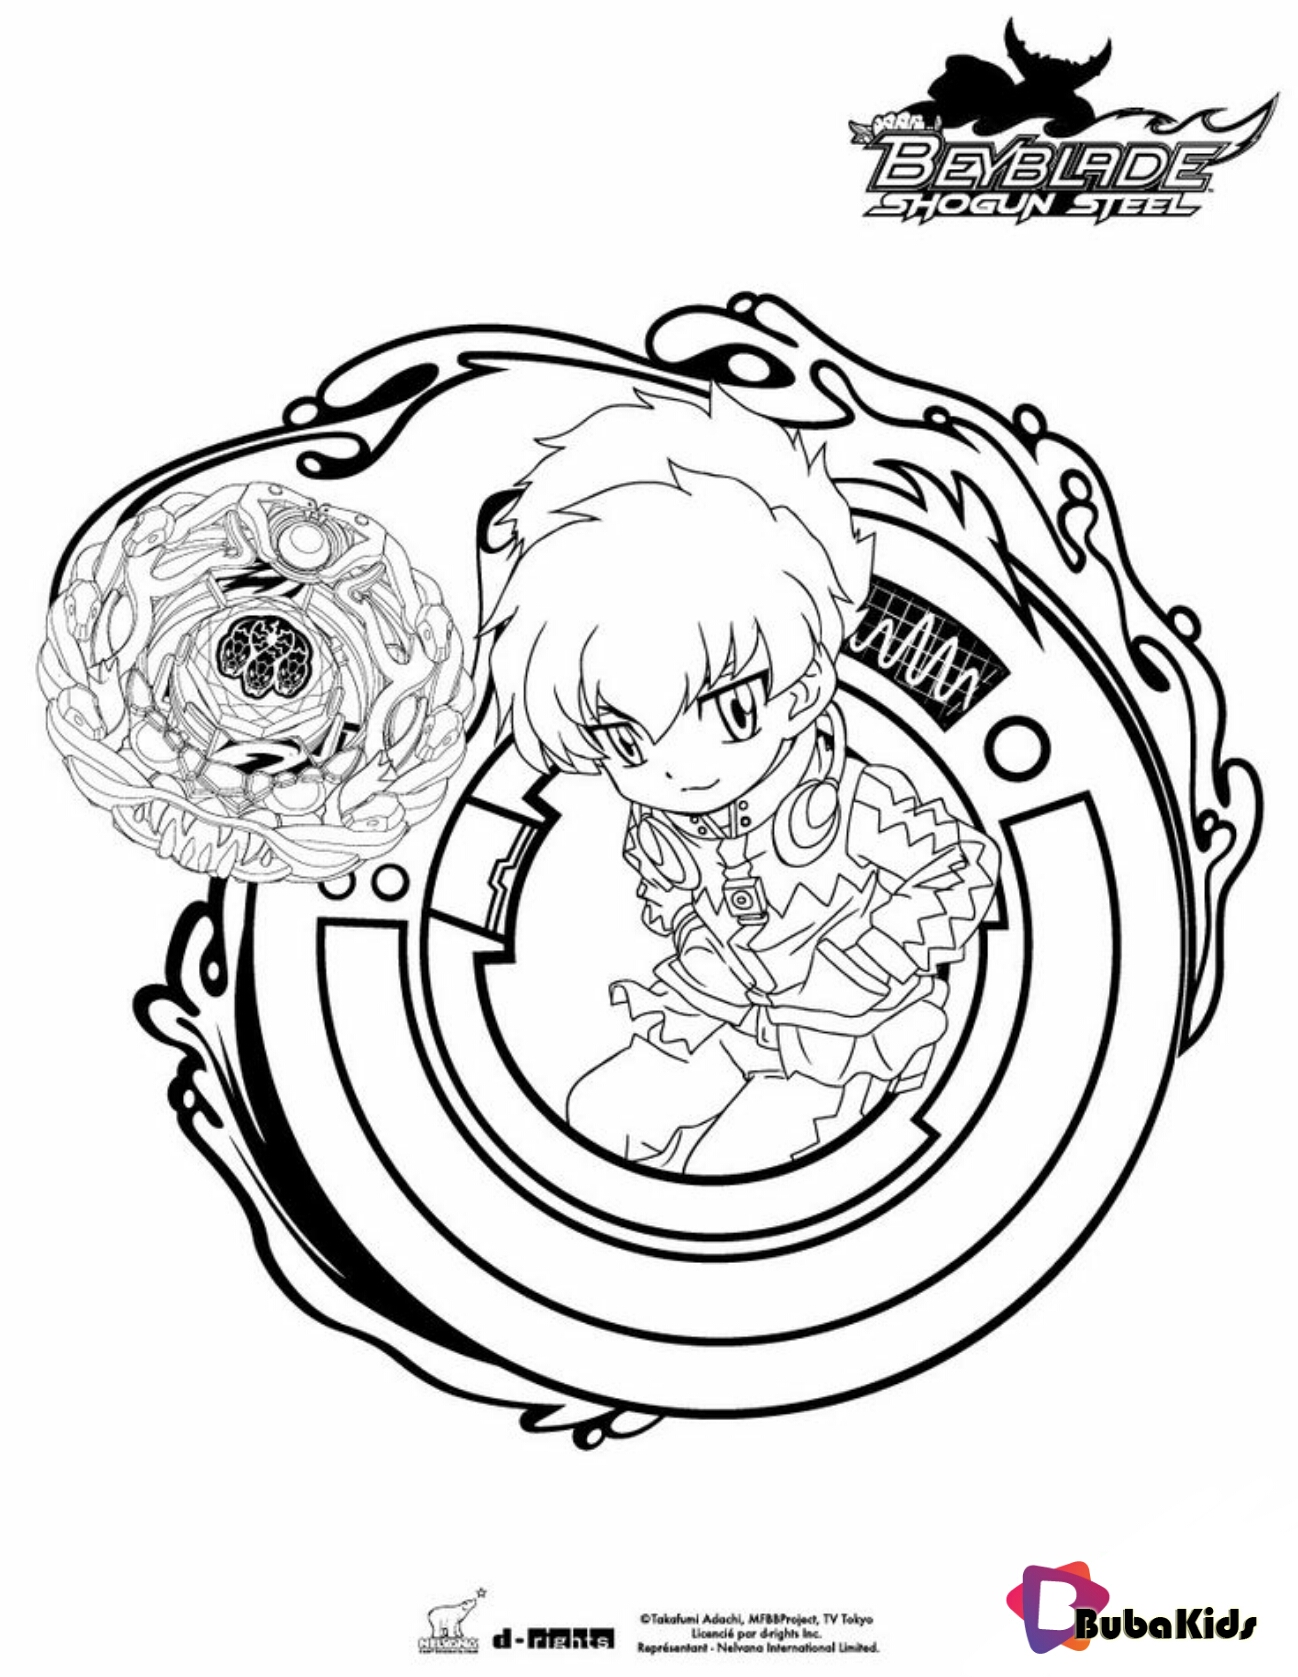 Eight coloring page, More Beyblade coloring sheets on bubakids.com Wallpaper